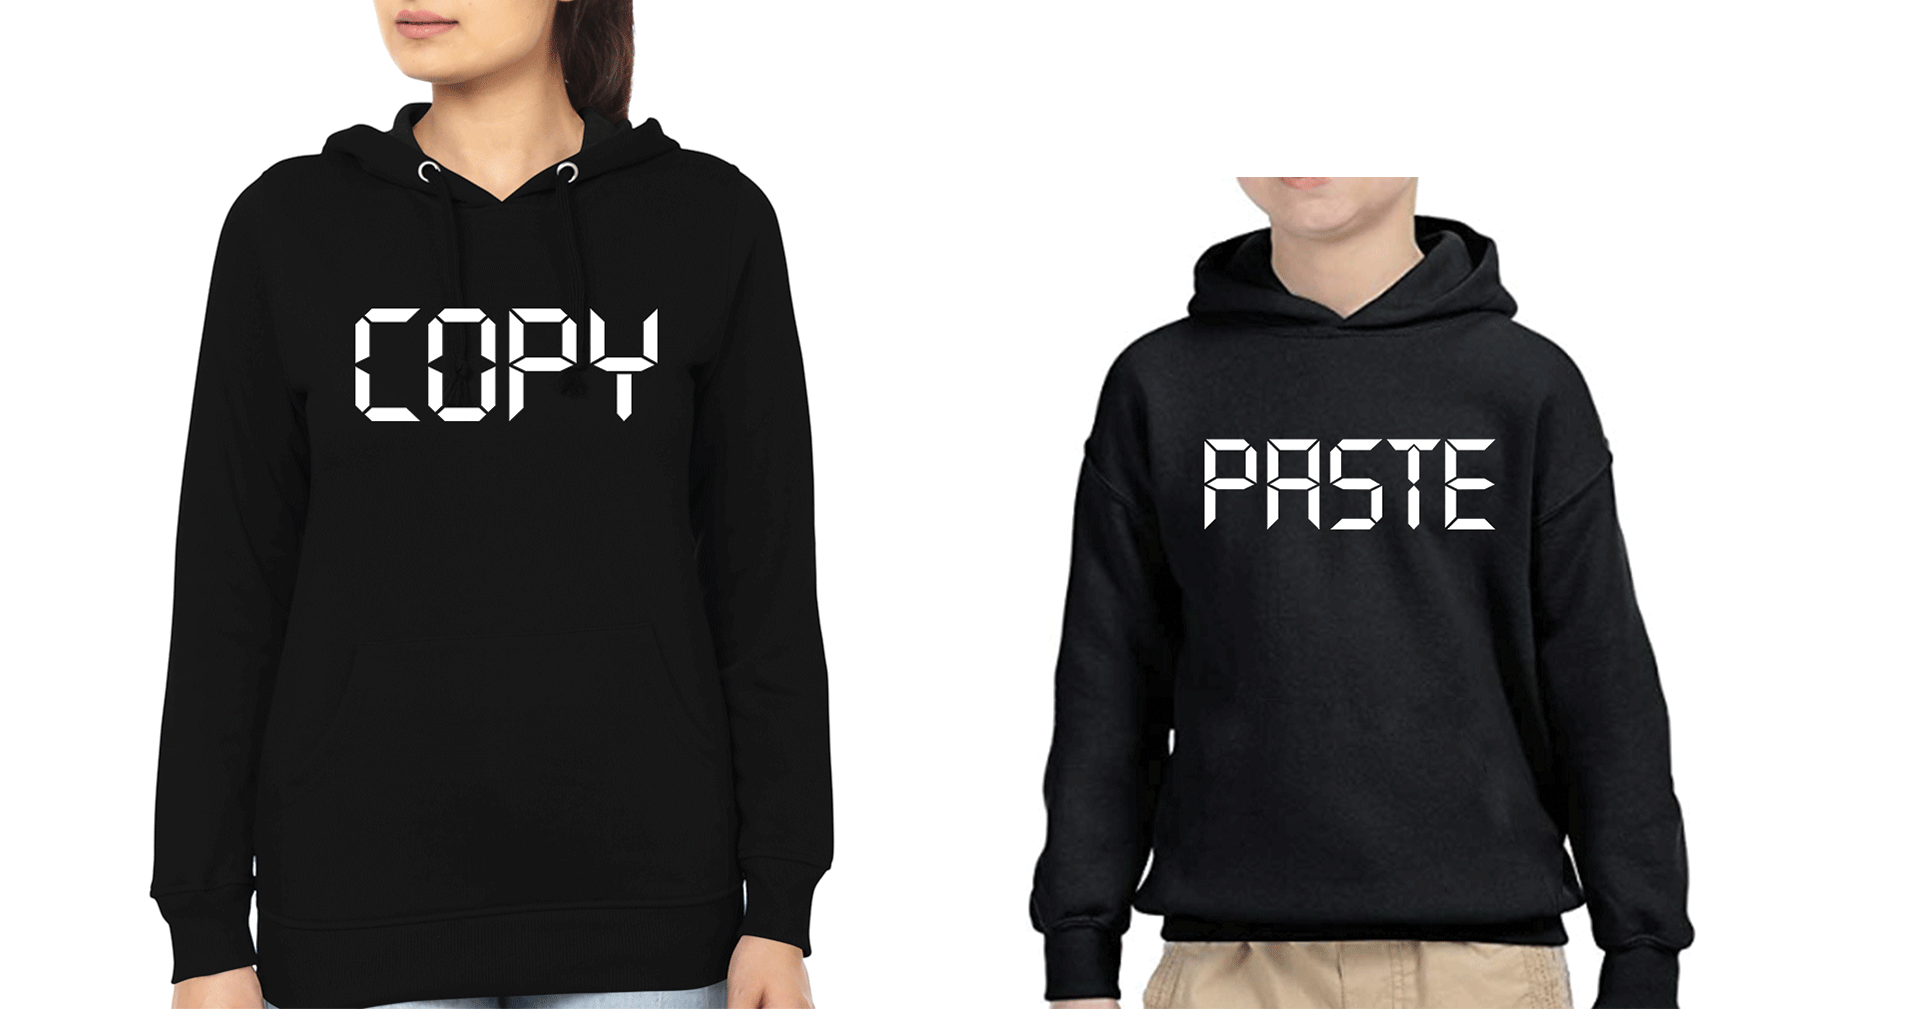 Copy Paste Mother and Son Matching Hoodies- FunkyTradition